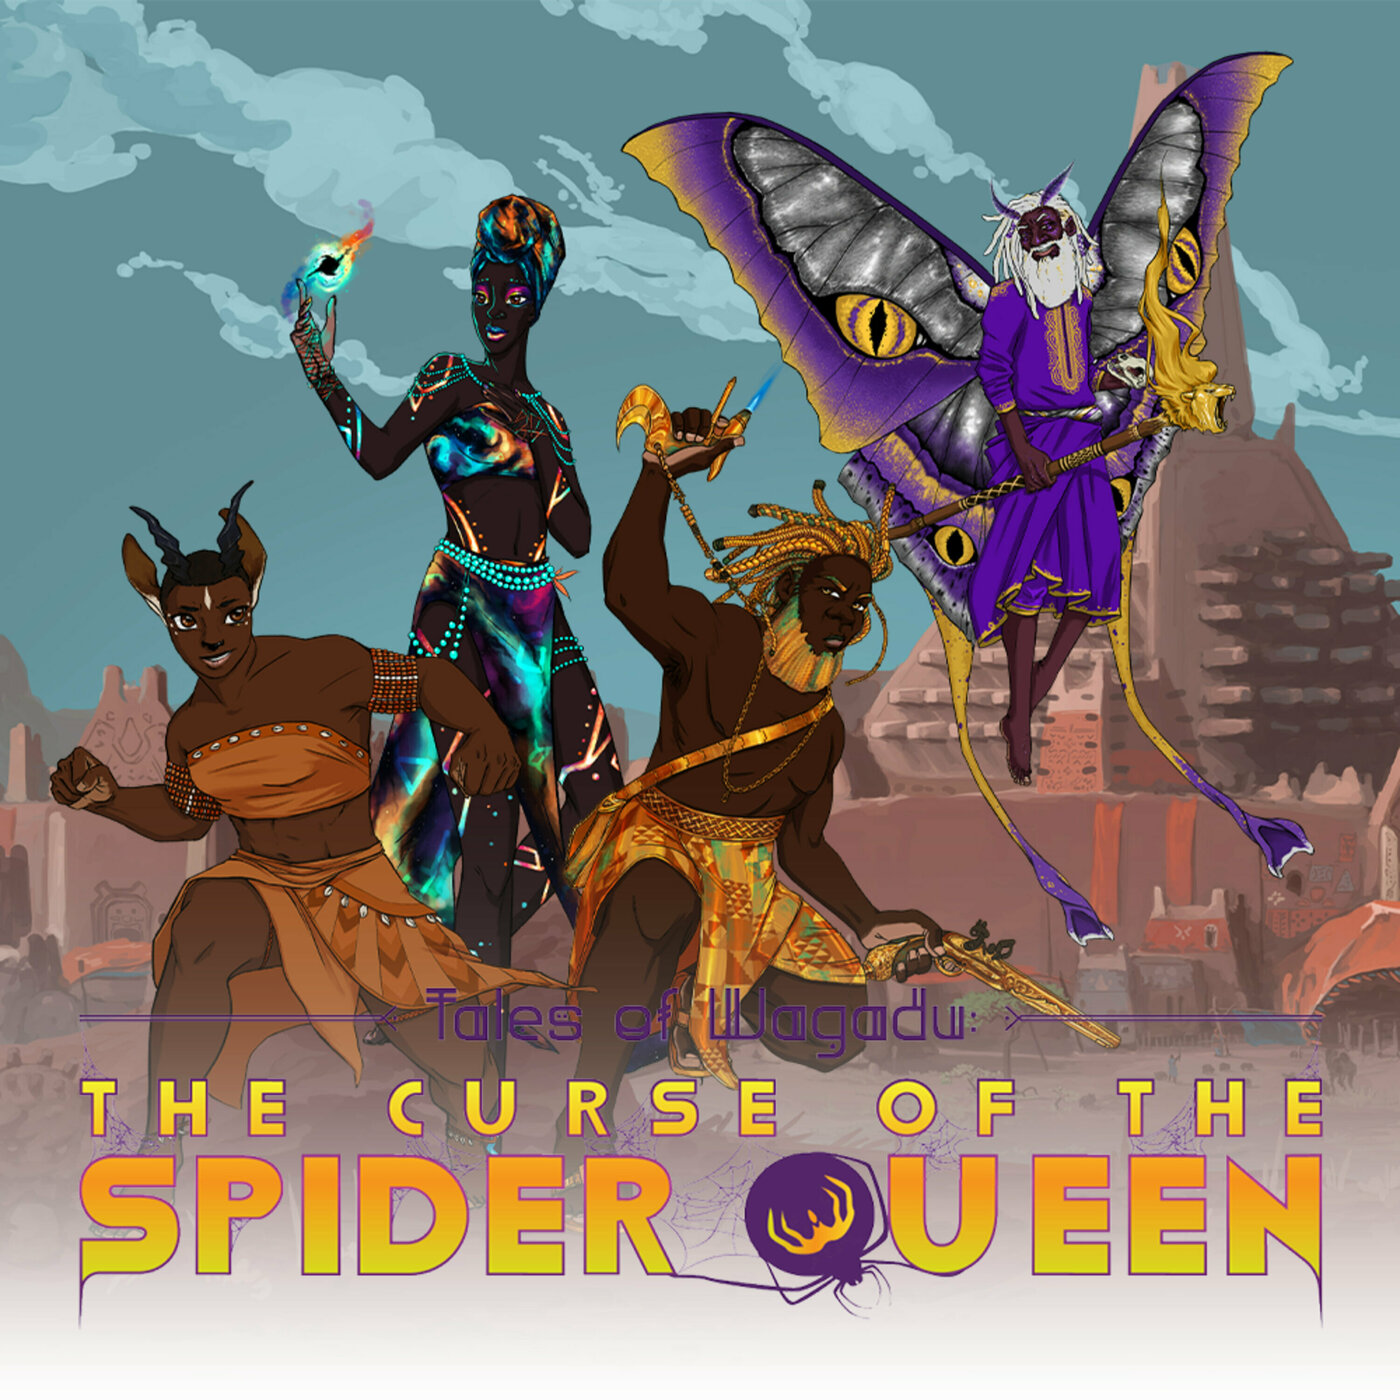 Tales of Wagadu: The Curse of the Spider Queen Ep. 14 